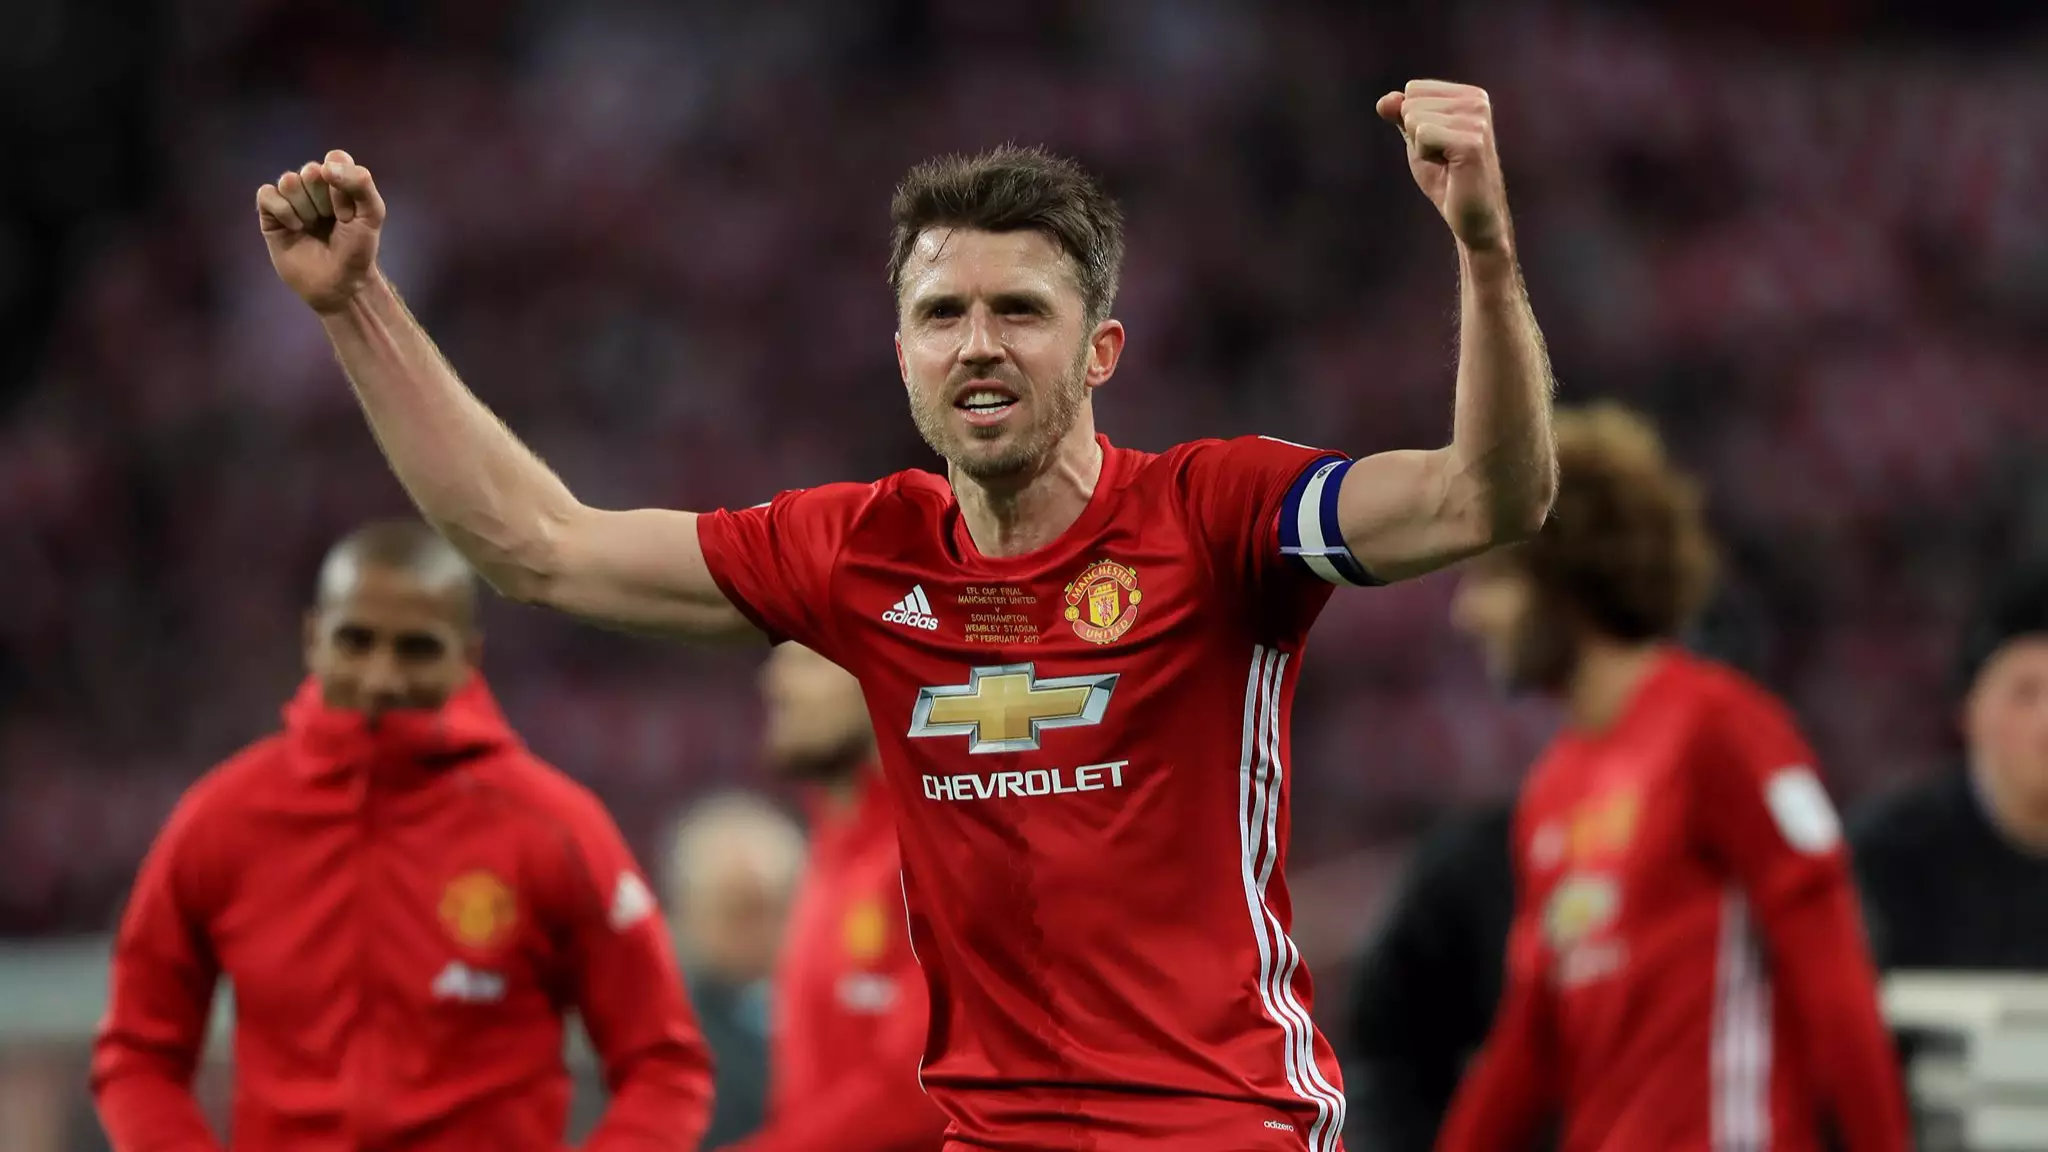 Michael Carrick Names The Man Who Will Be Captain After Him